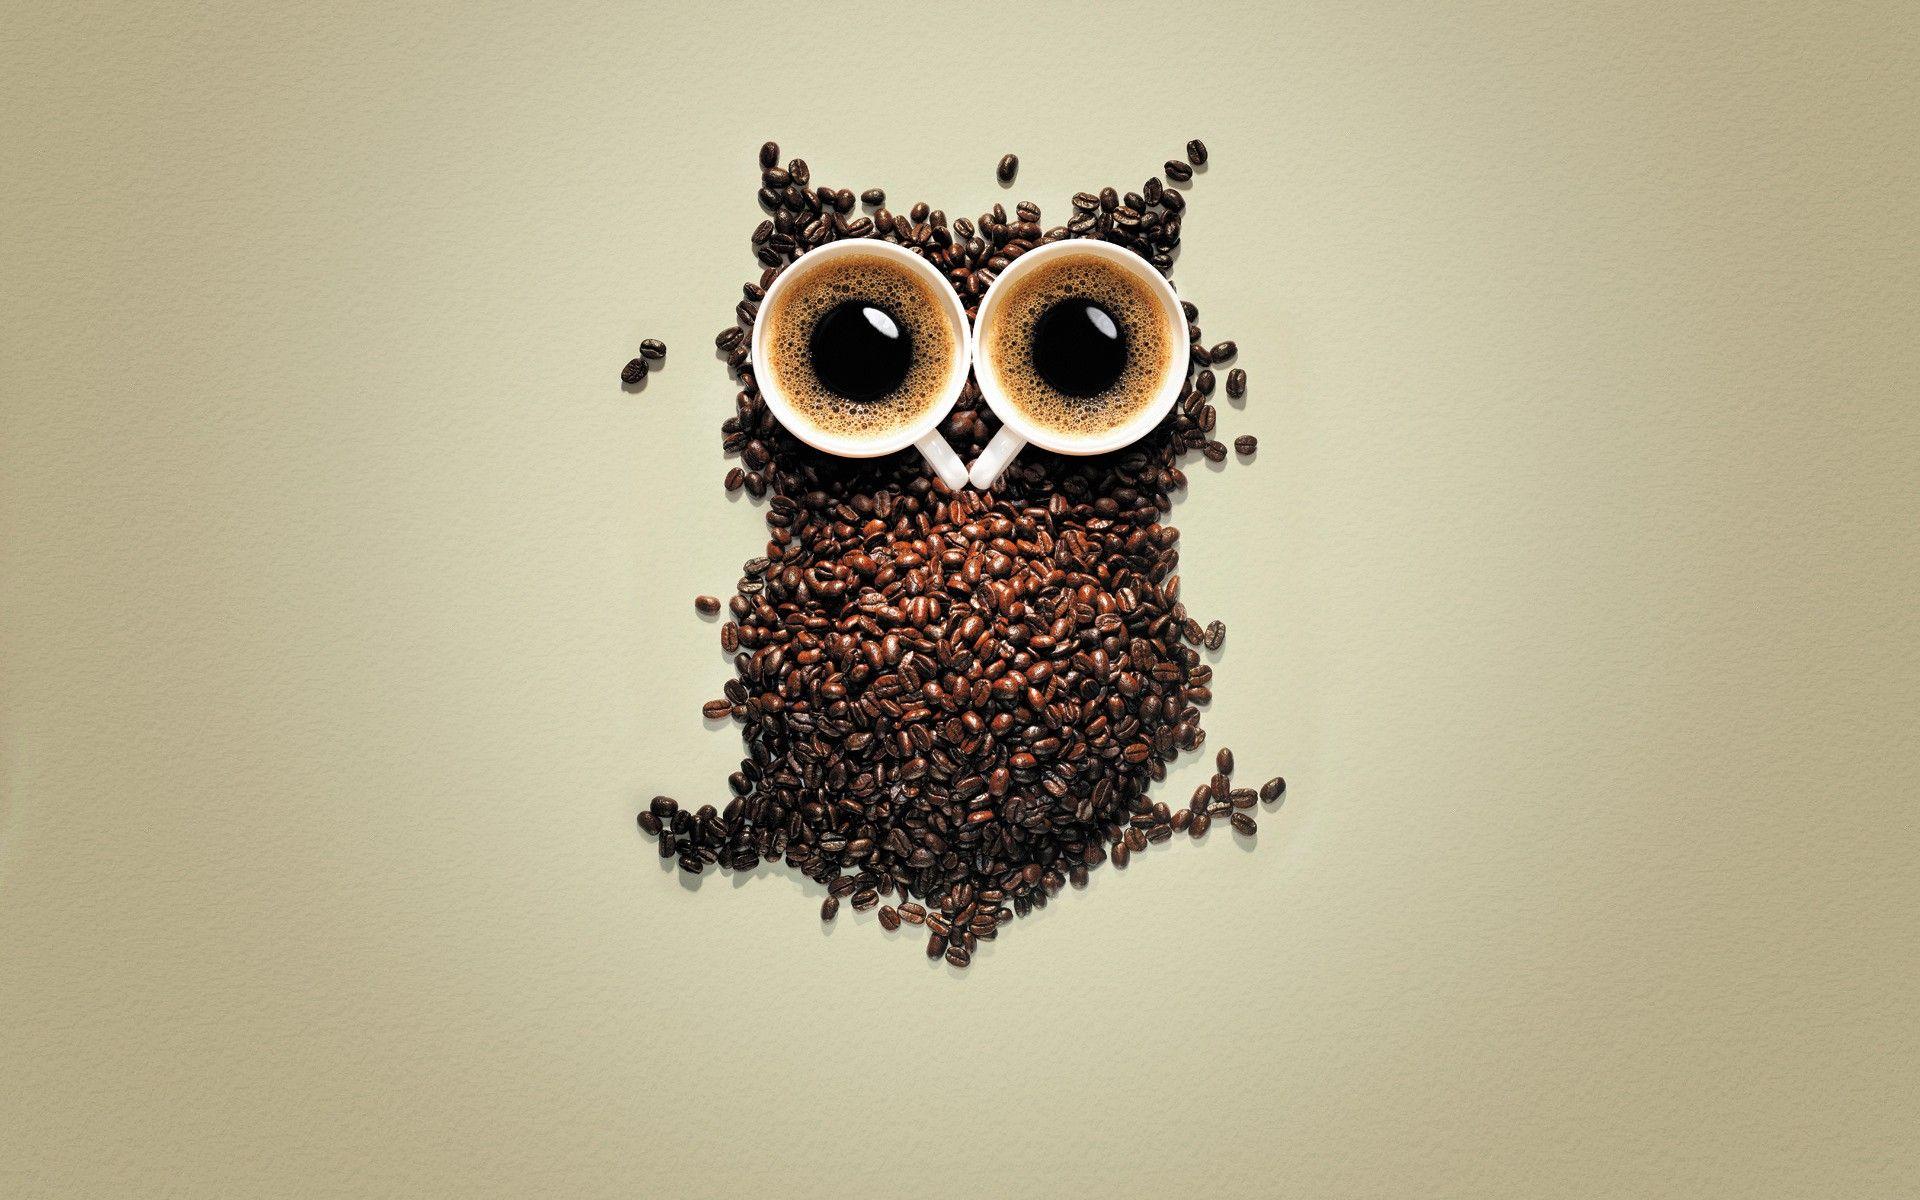 Download the Coffee Owl Wallpaper, Coffee Owl iPhone Wallpaper